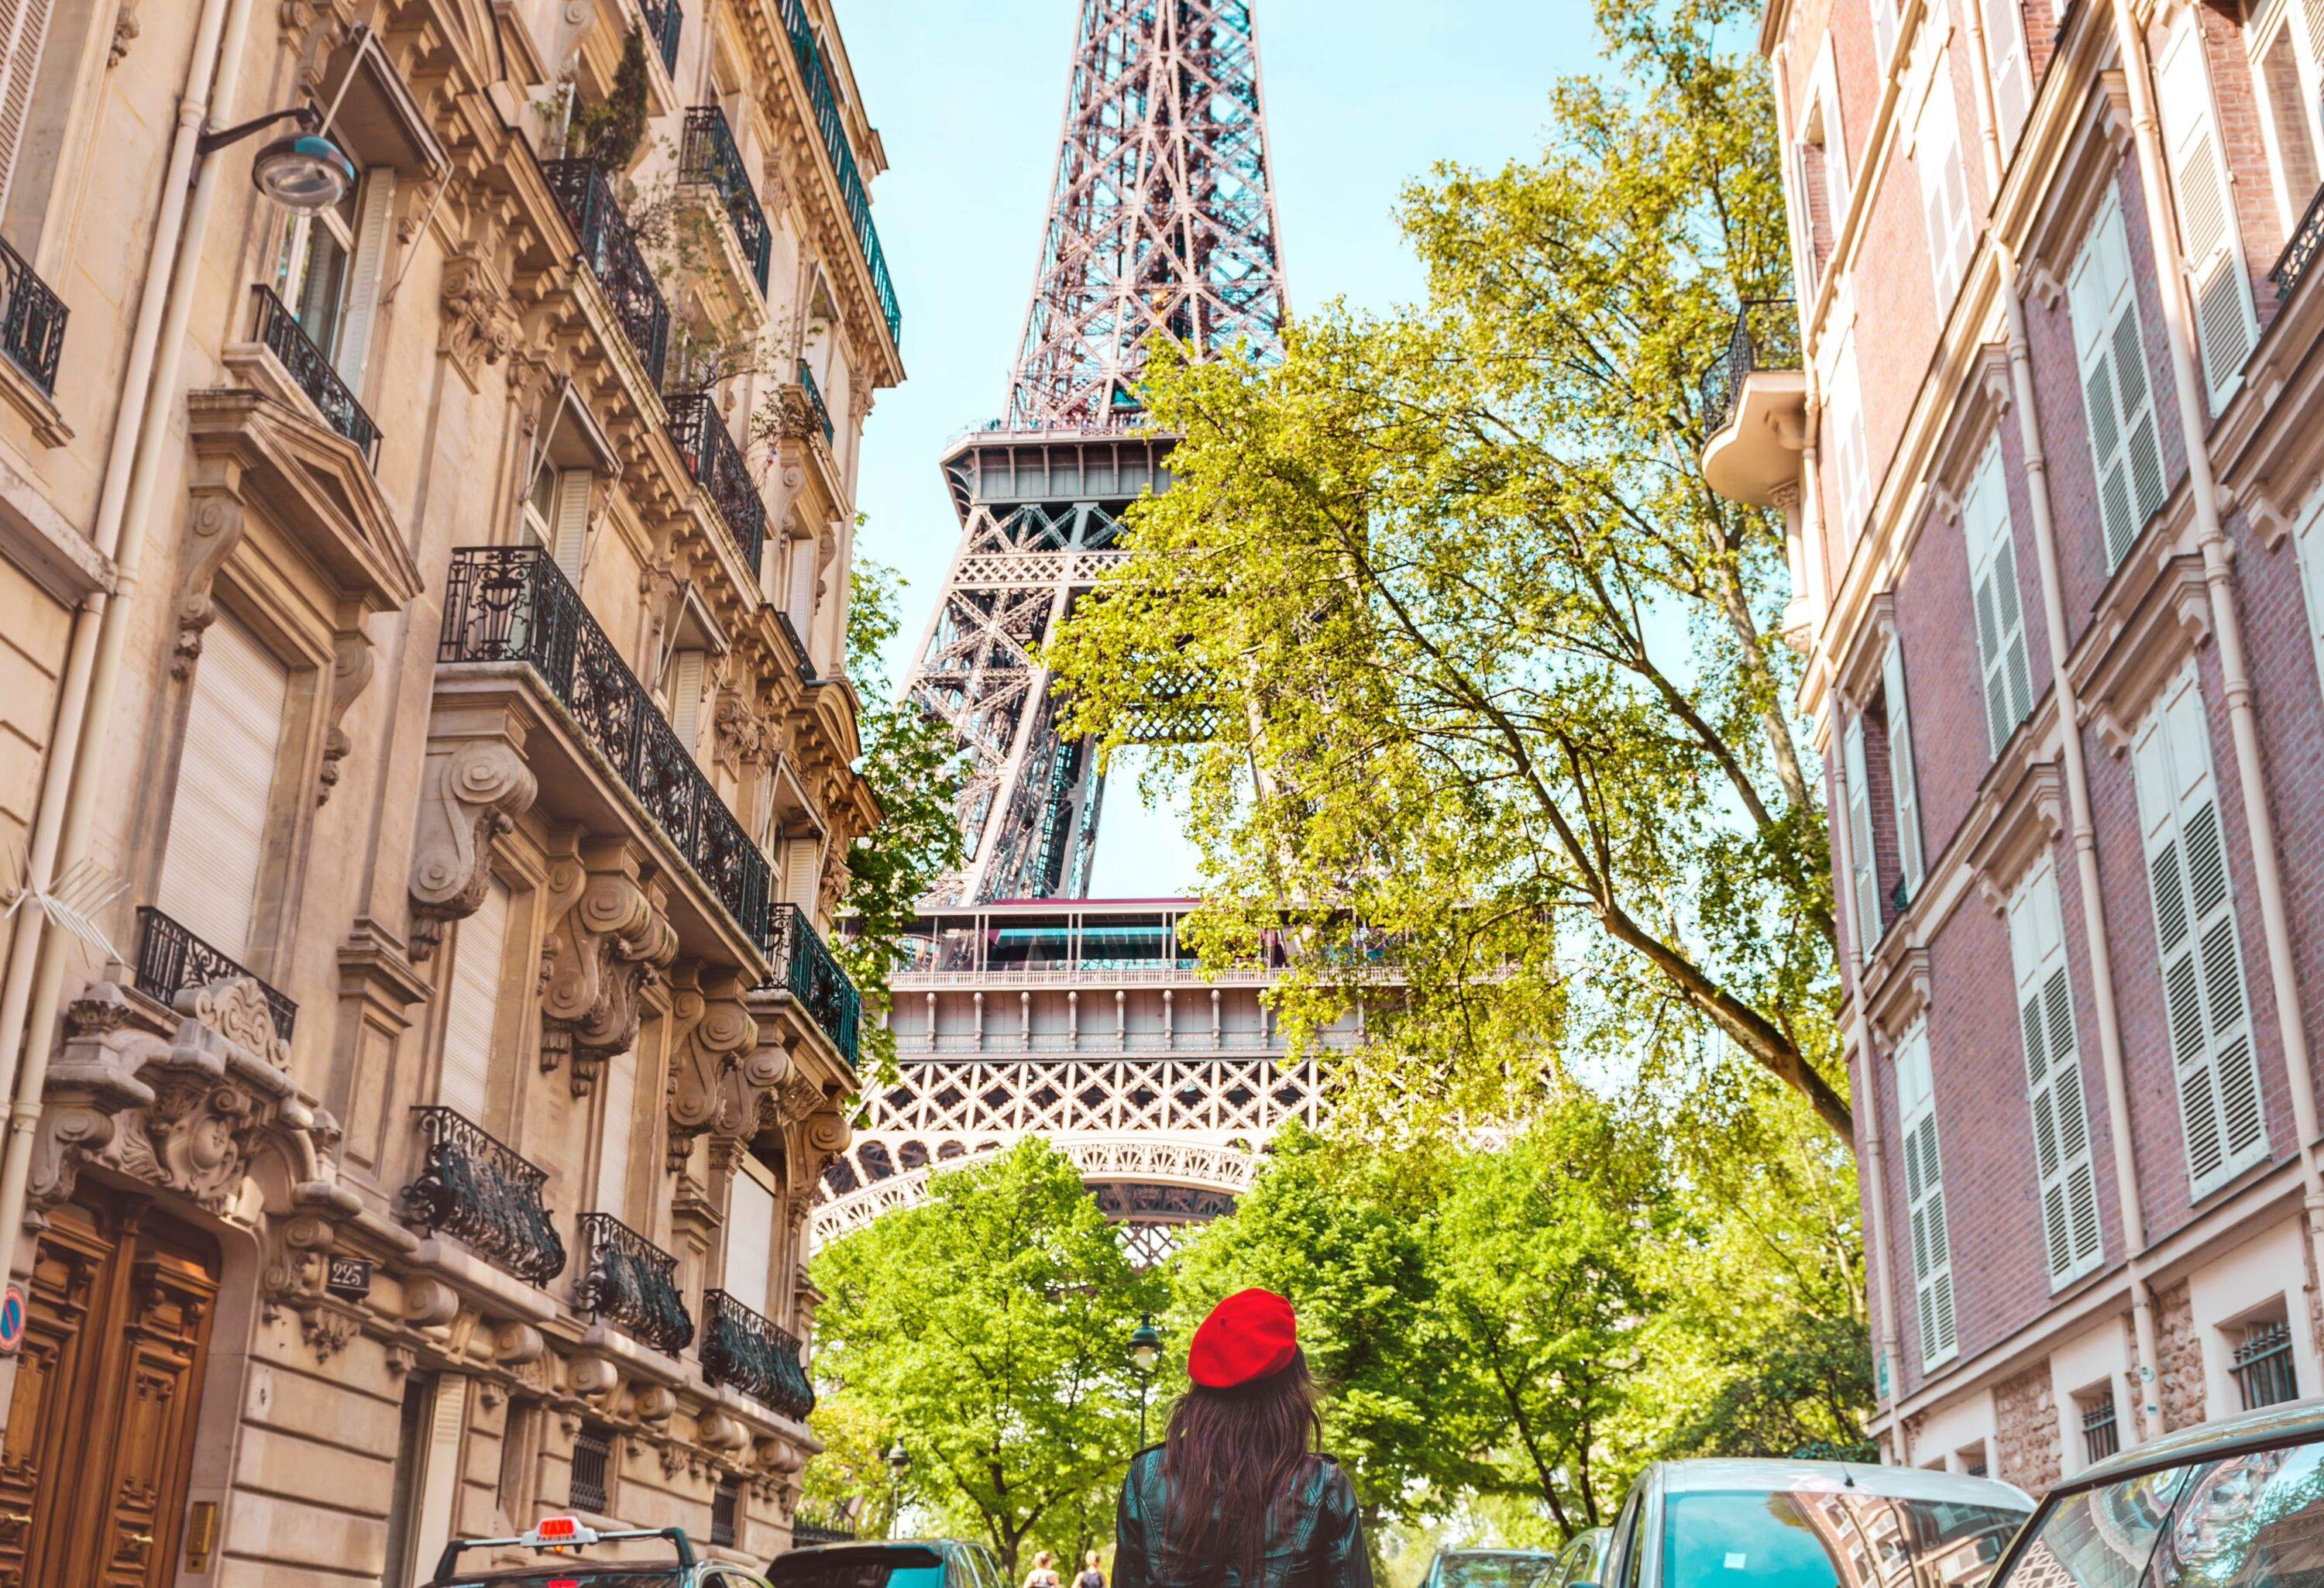 A woman in casual clothes walks on a street bordered by parked cars and adjacent buildings while staring at the Eiffel Tower.